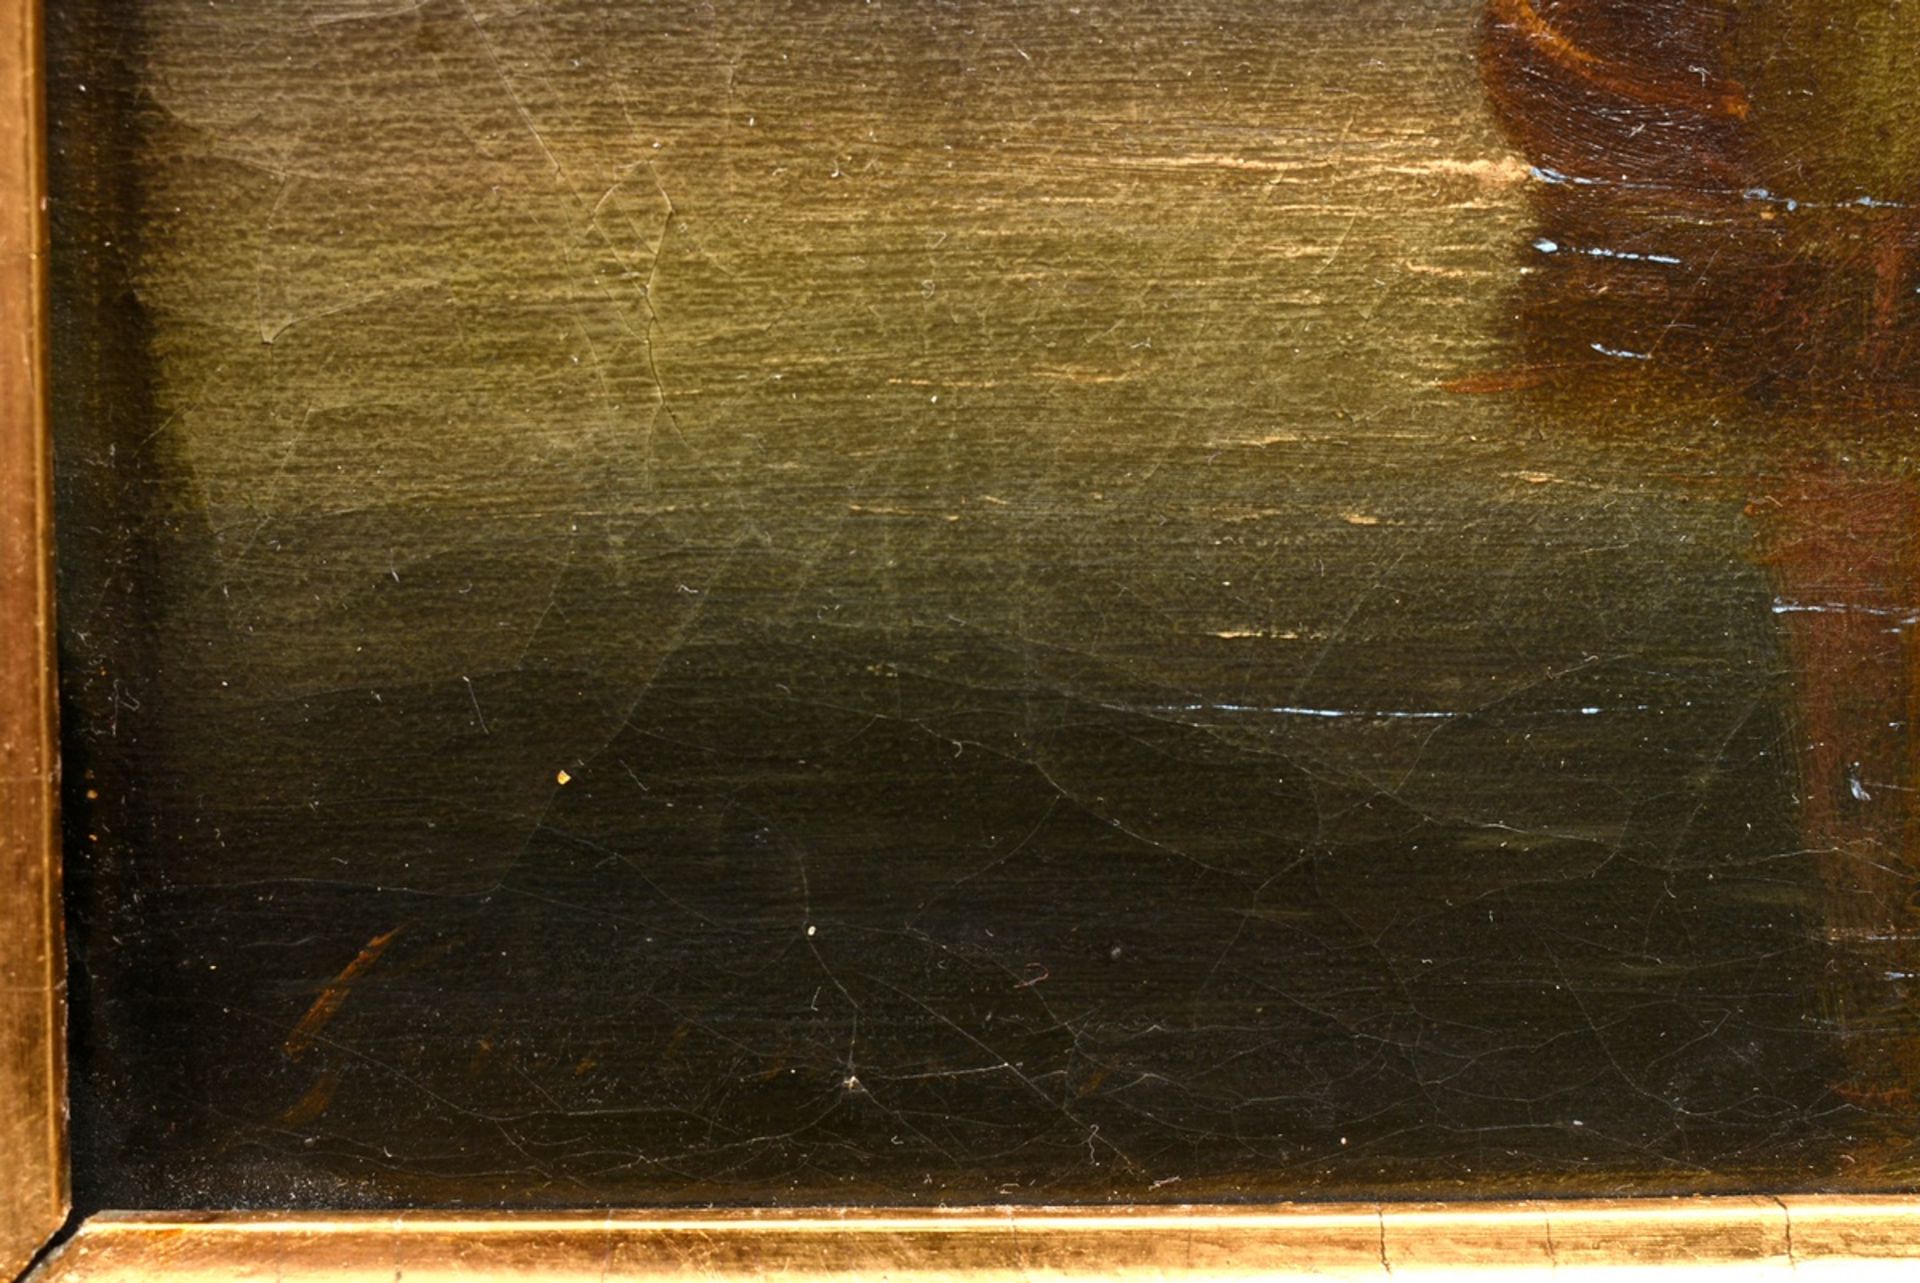 2 Unknown artist of the 18th/19th c. "Dutch Navy Motivs", oil/canvas, each illegibly sign. lower le - Image 3 of 7